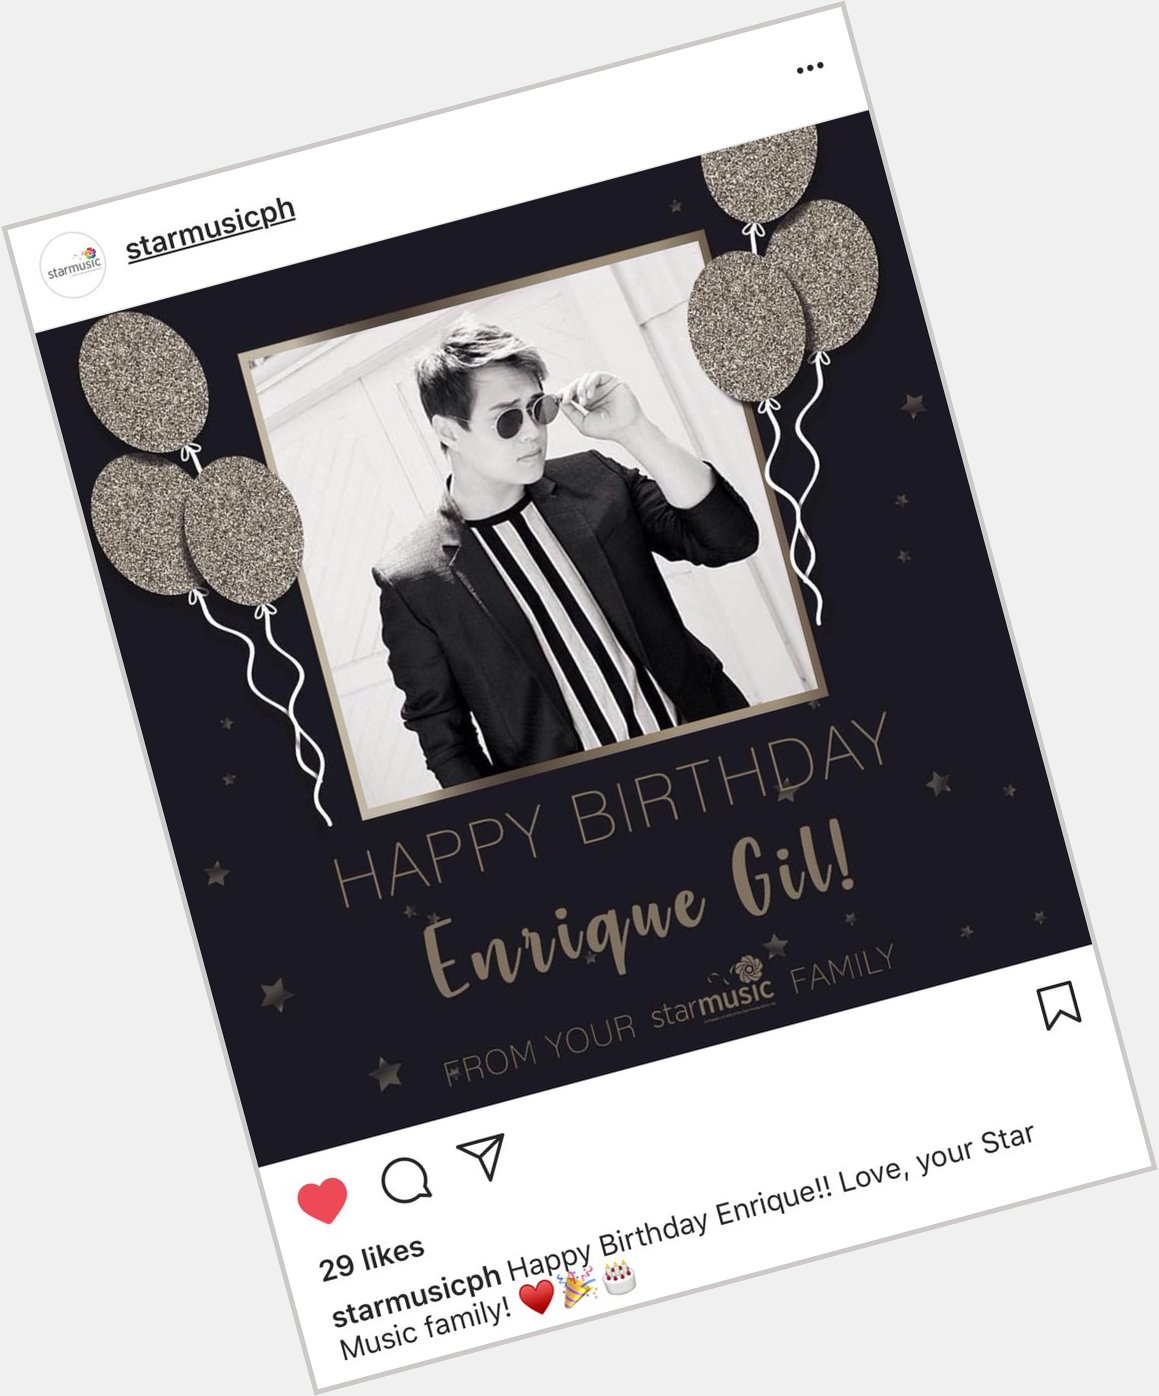 \" Happy Birthday Enrique Gil from Star Music 